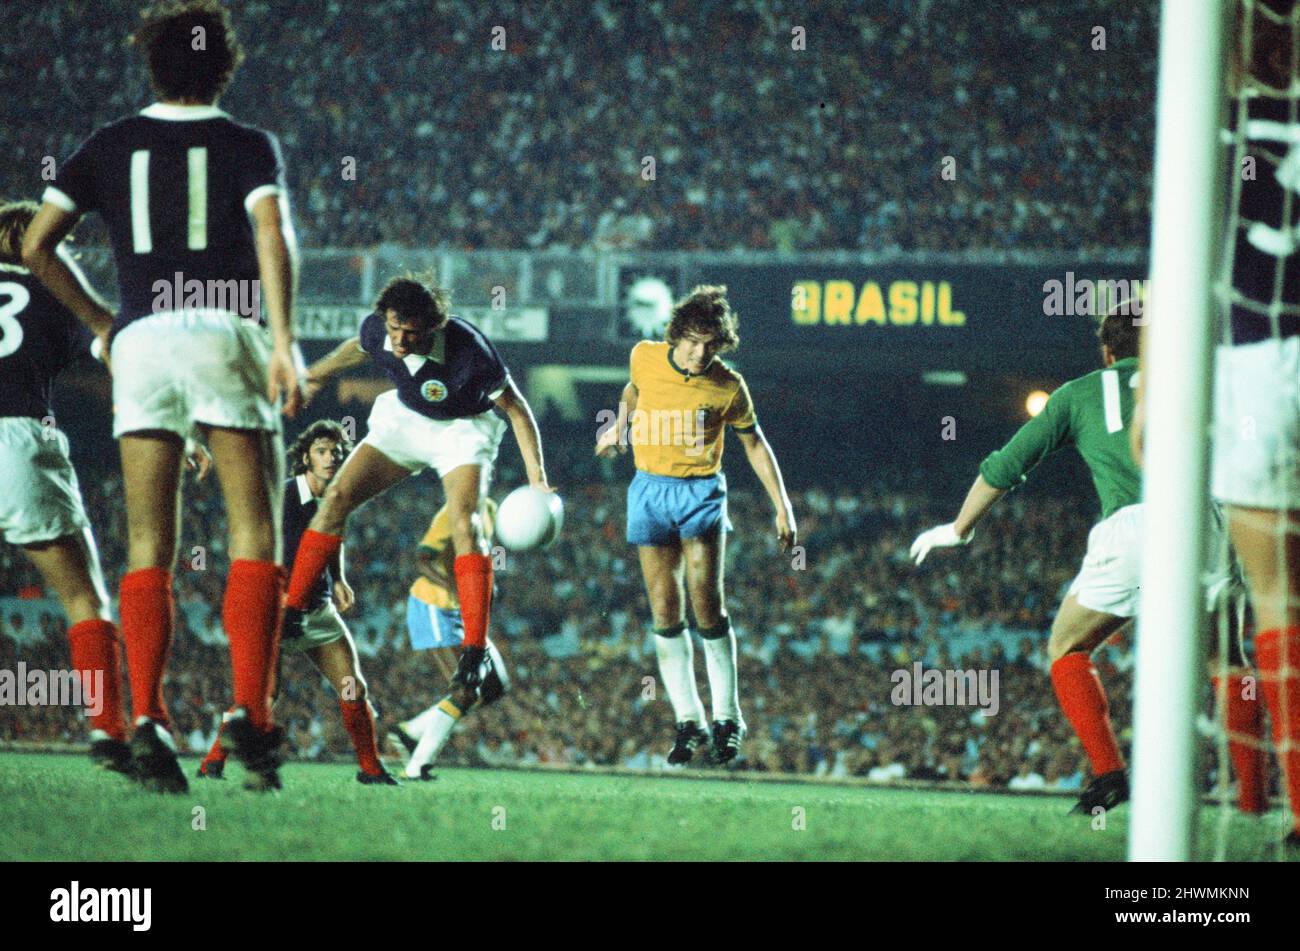 Brazil 1-0 Scotland, 1972 Brazil Independence Cup, final stage, Group A match at the Estadio do Maracana, Rio de Janeiro, Brazil, Wednesday 5th July 1972. Pictured, Leivinha of Brazil causing problems for Scotland defenders. Stock Photo